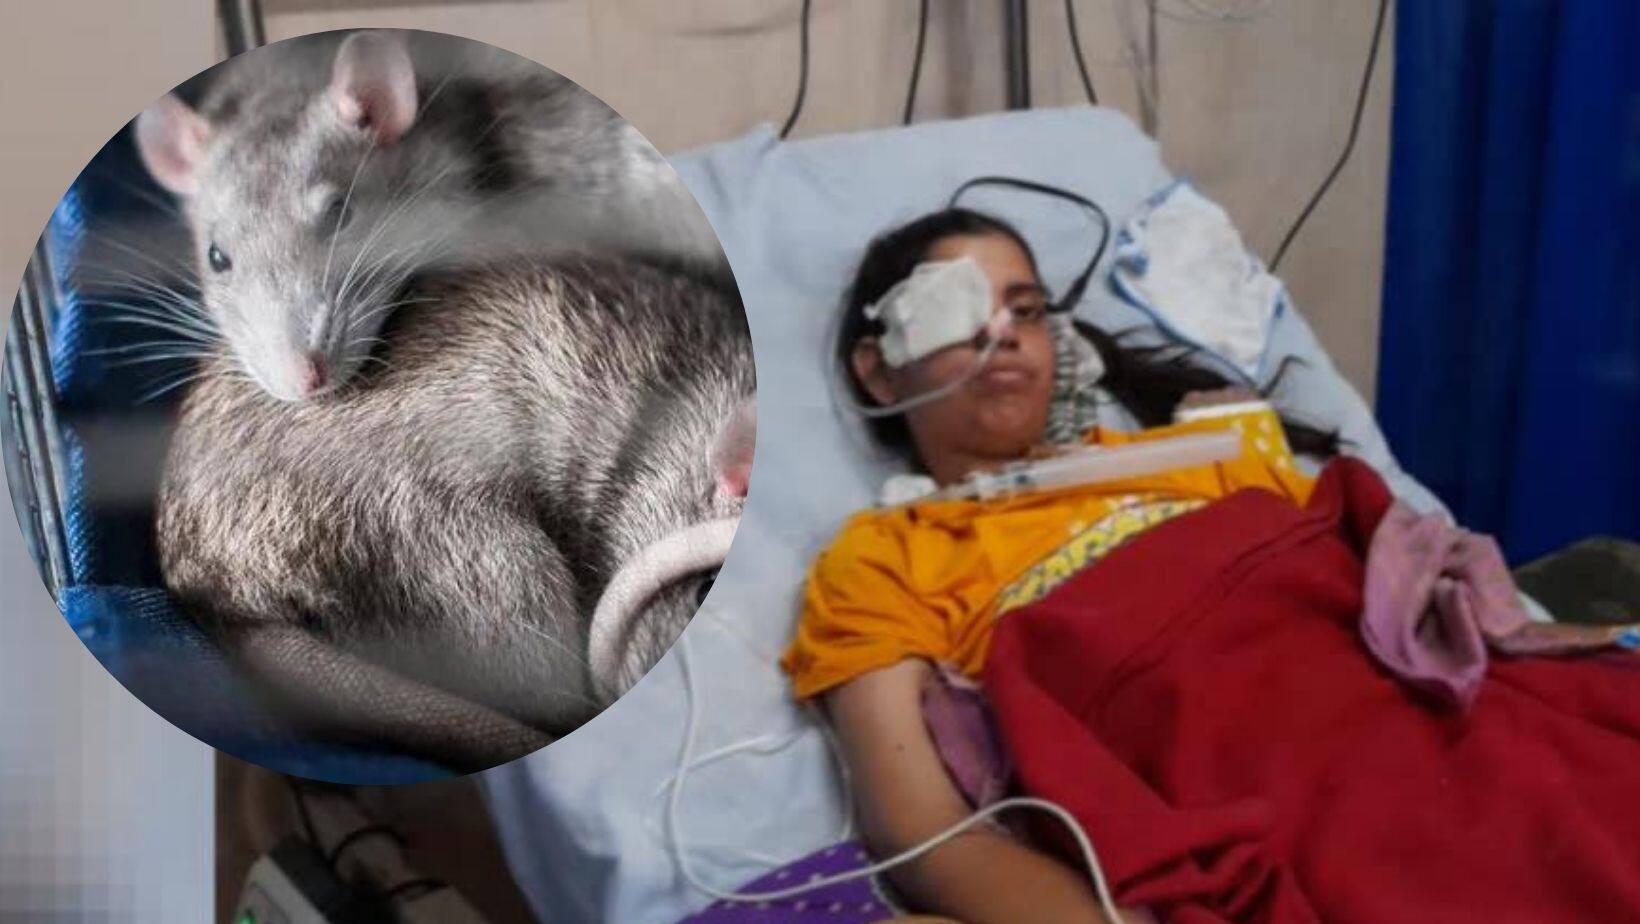 Rajasthan Woman's Eyelids Nibbled By Rats In ICU: What to Know About Rat Bite